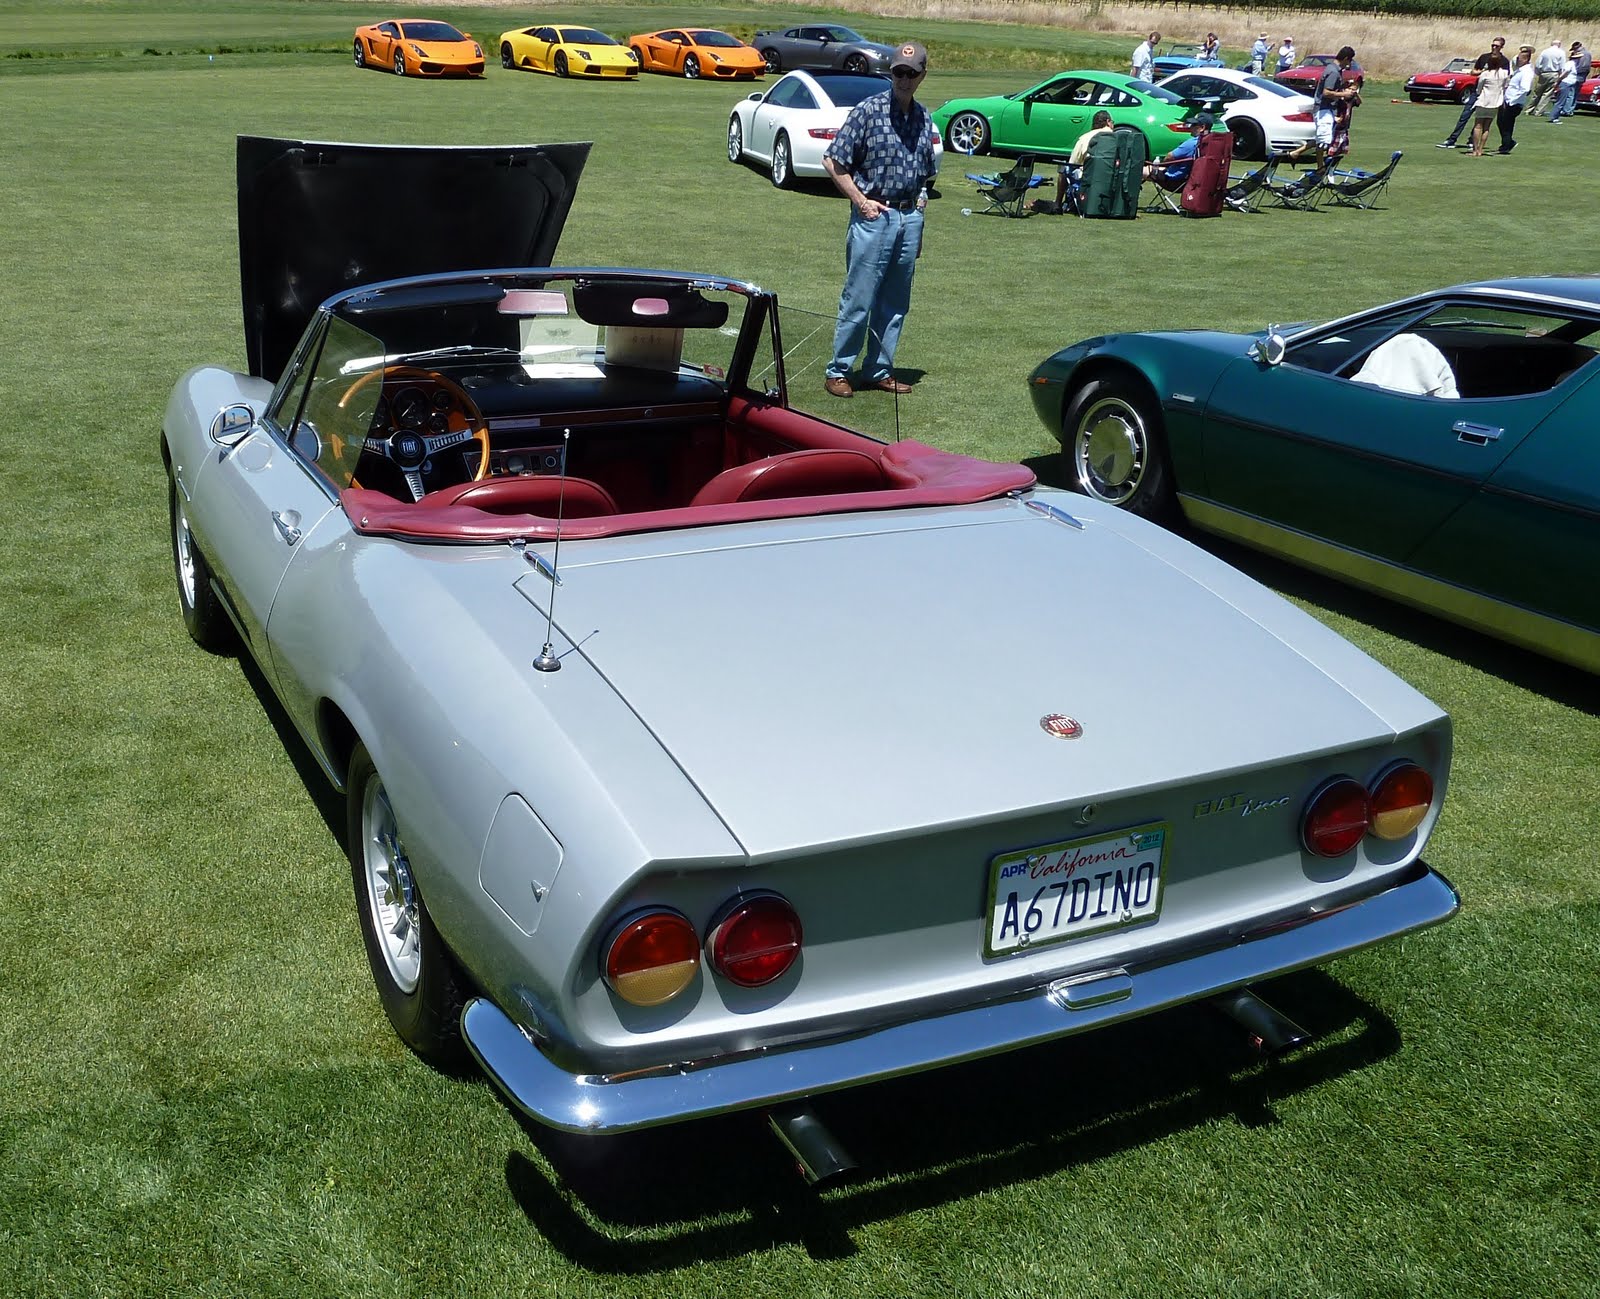 Fiat Dino Spider - The Overlooked Classic